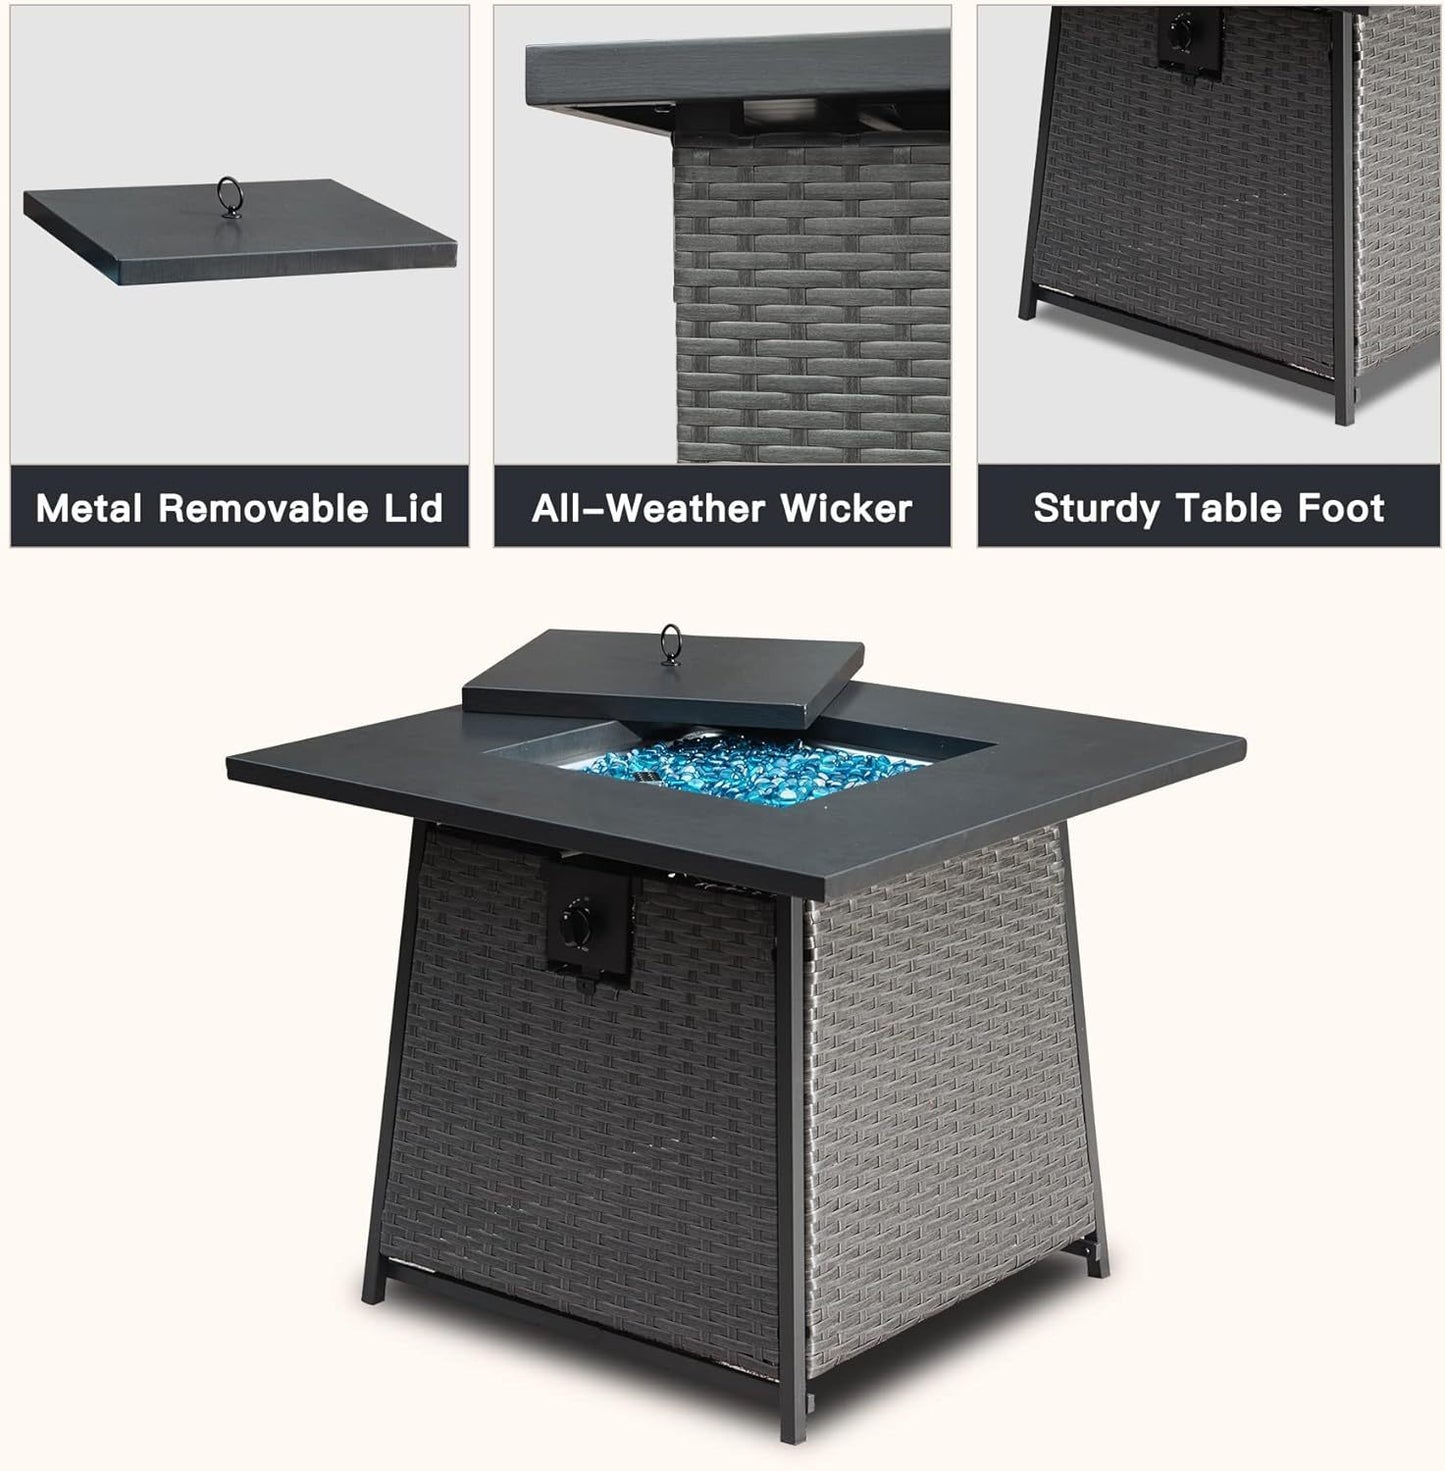 32 Inch Propane Fire Pits Table with Blue Glass Ball,50,000 BTU Outdoor Wicker Fire Table with ETL-Certified,2-in-1 Square Steel Gas Firepits (Dark Gray)